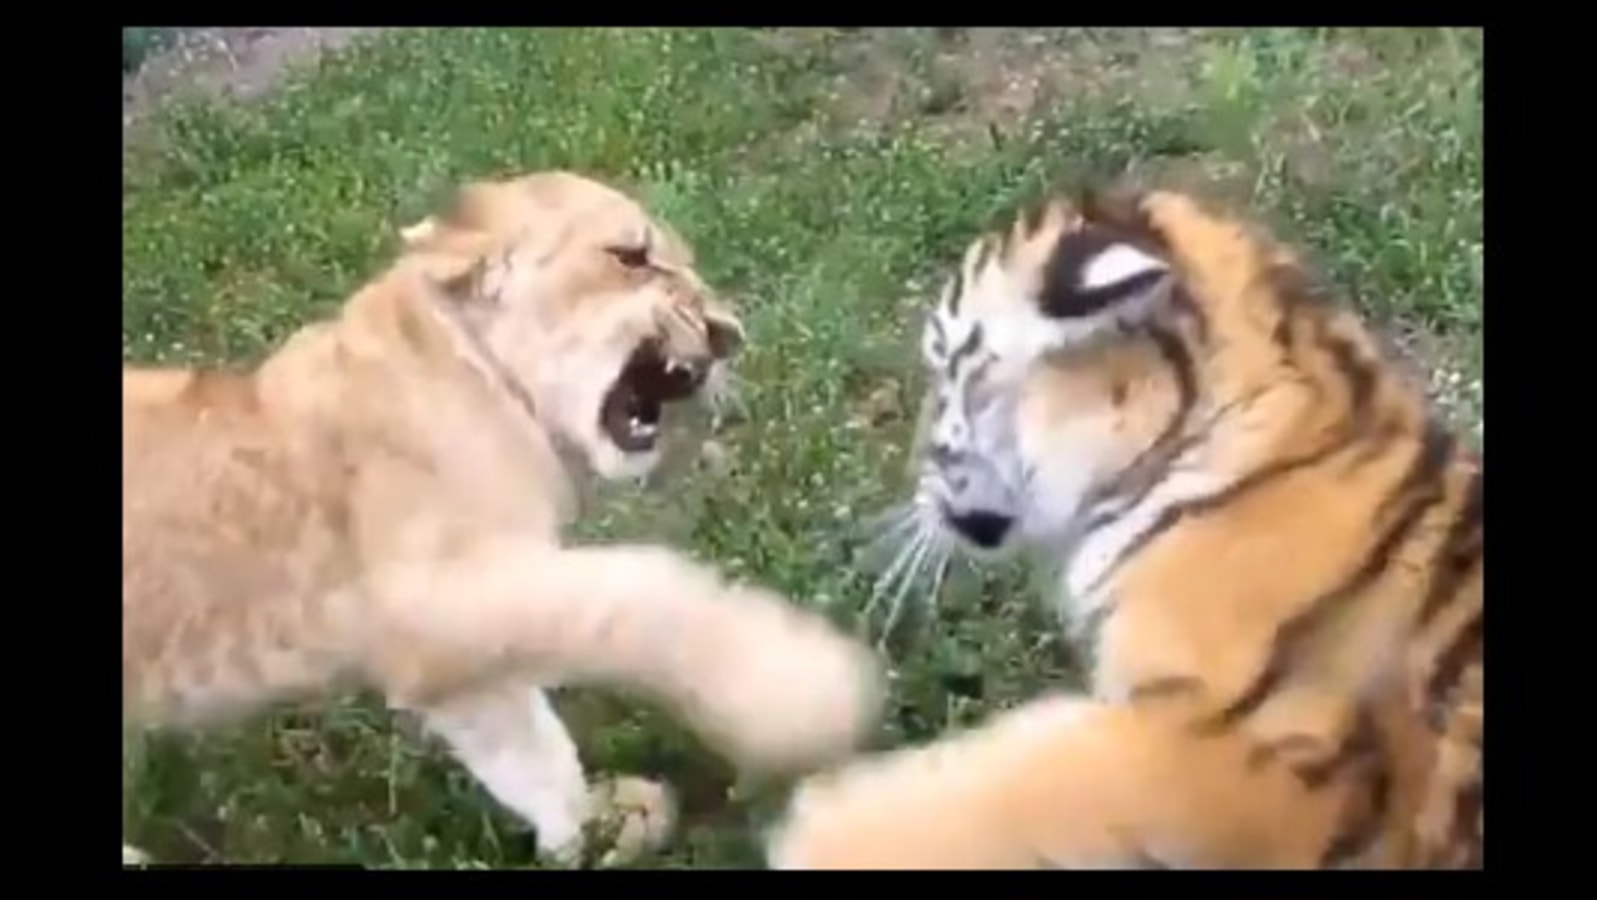 Tiger cub 'fiercely' fights with lion cub, end up melting ...